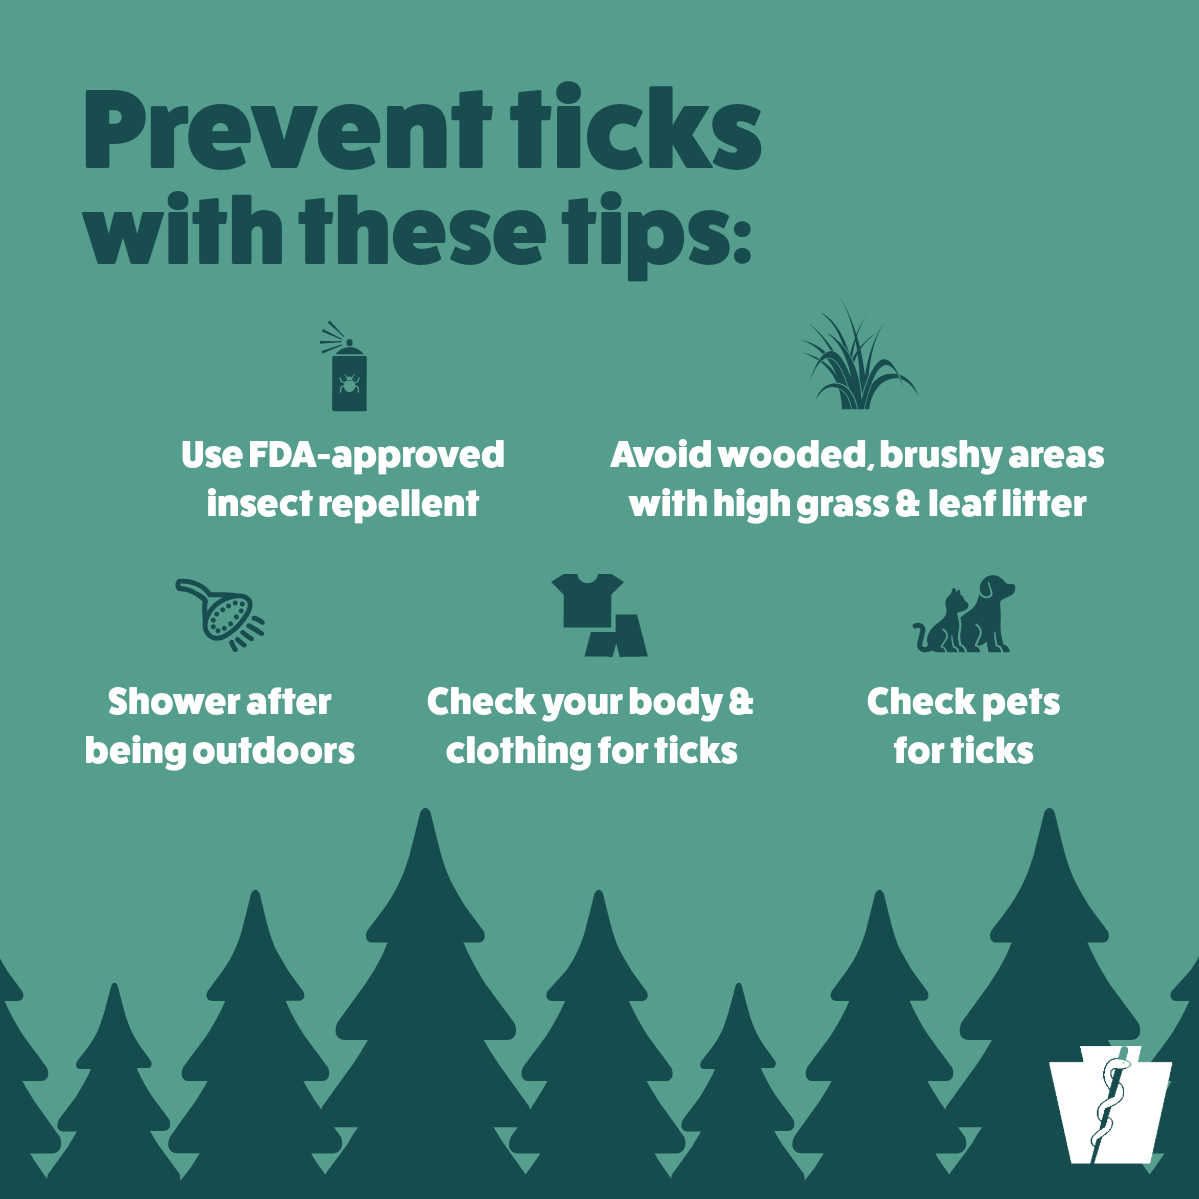 Heading out for a hike?🌲 Walk in the center of trails + avoid areas with high grass and leaf litter. Follow these tips to avoid tick bites: